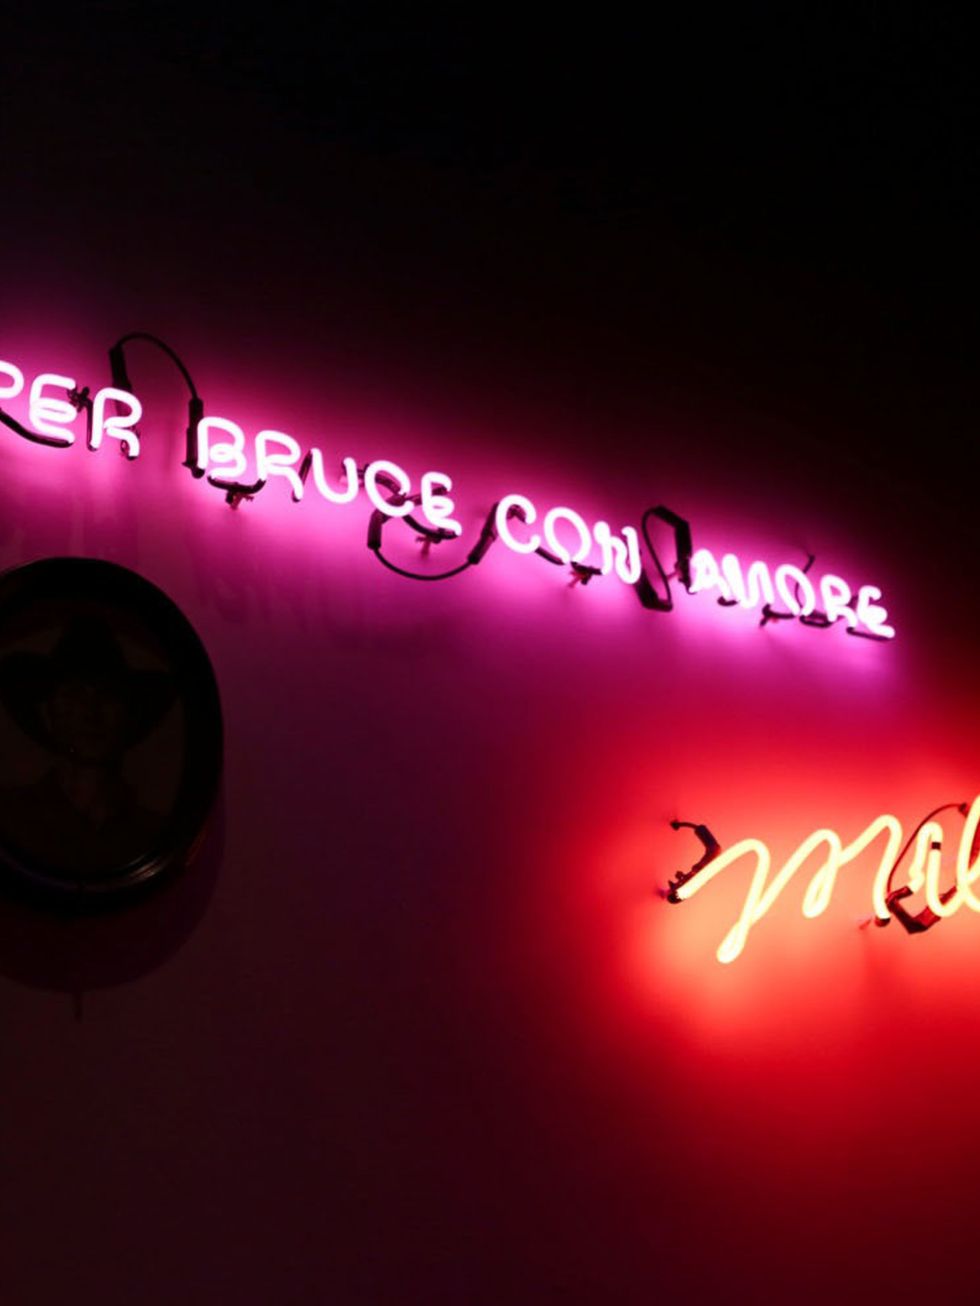 Text, Red, Magenta, Font, Signage, Neon sign, Electronic signage, Neon, Carmine, Darkness, 